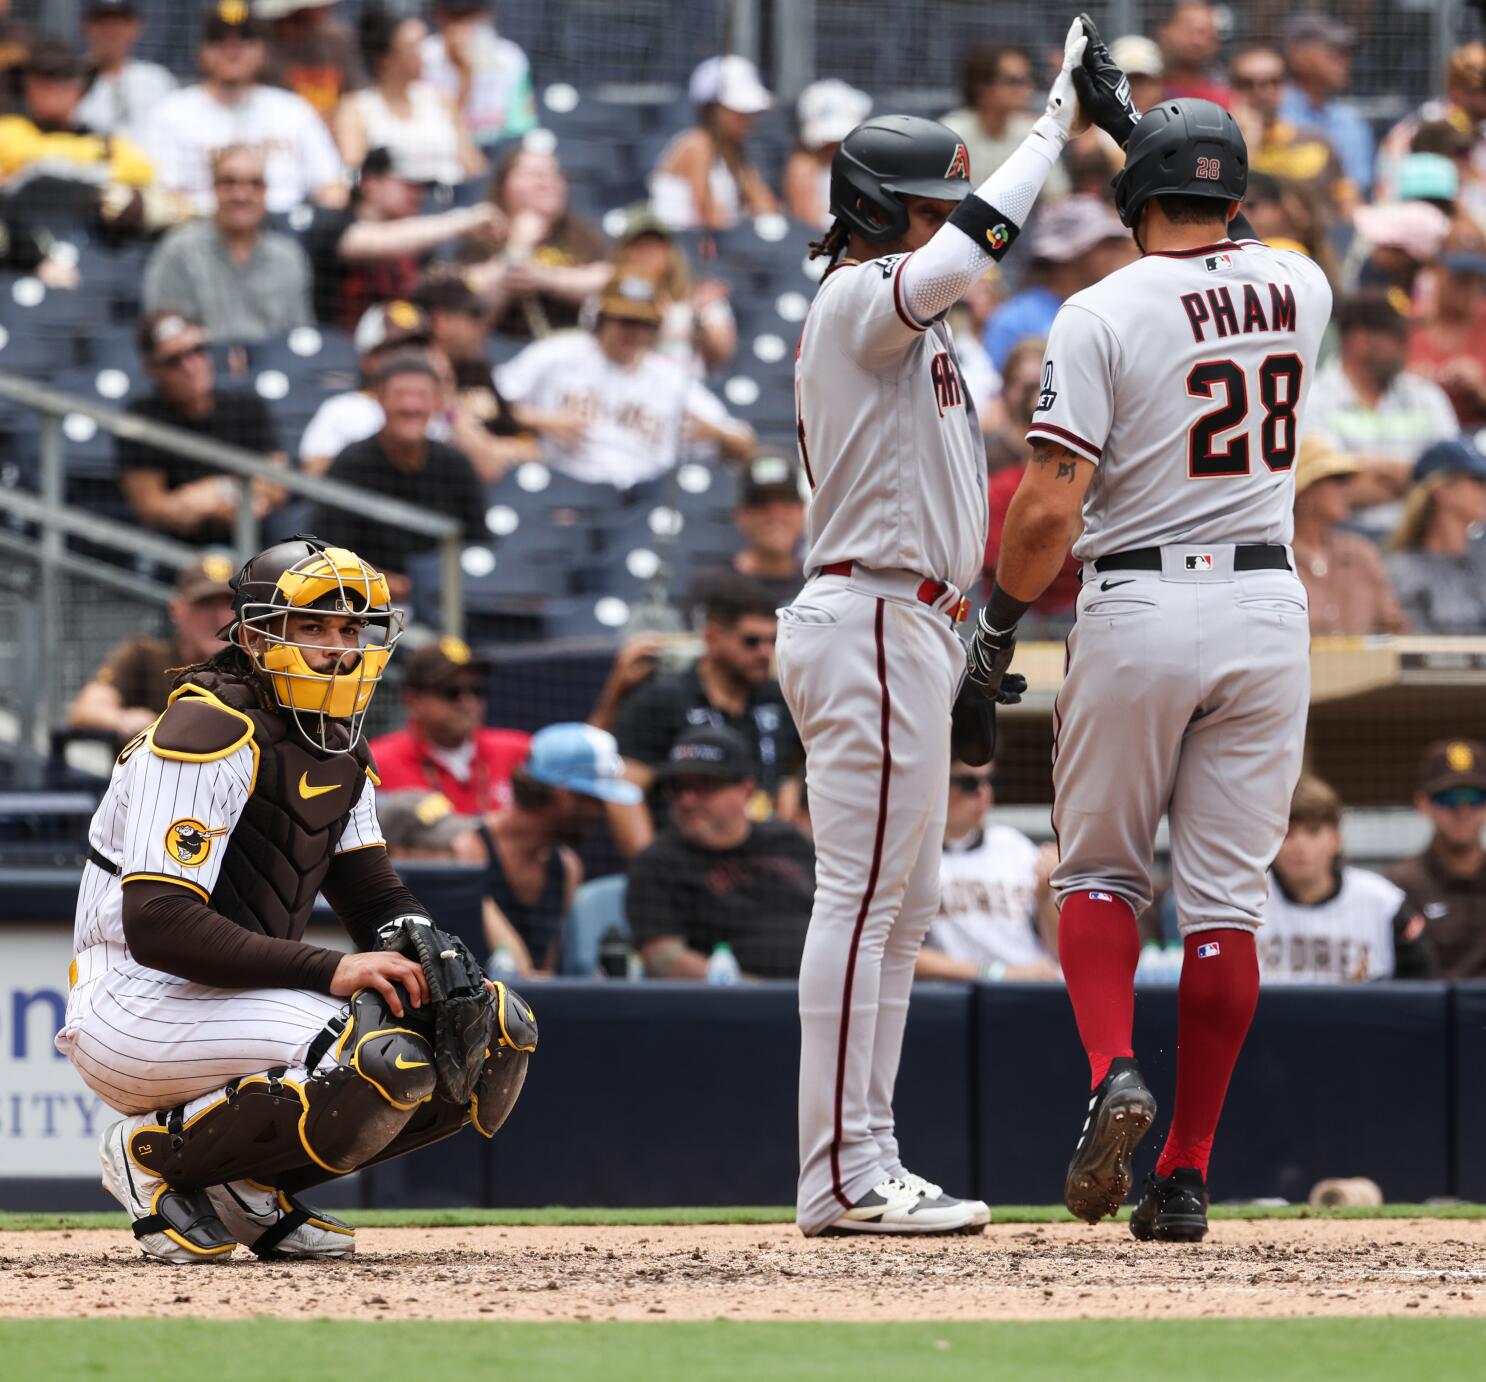 Padres notes: Tommy Pham's last laugh, Bob Melvin's slow hook